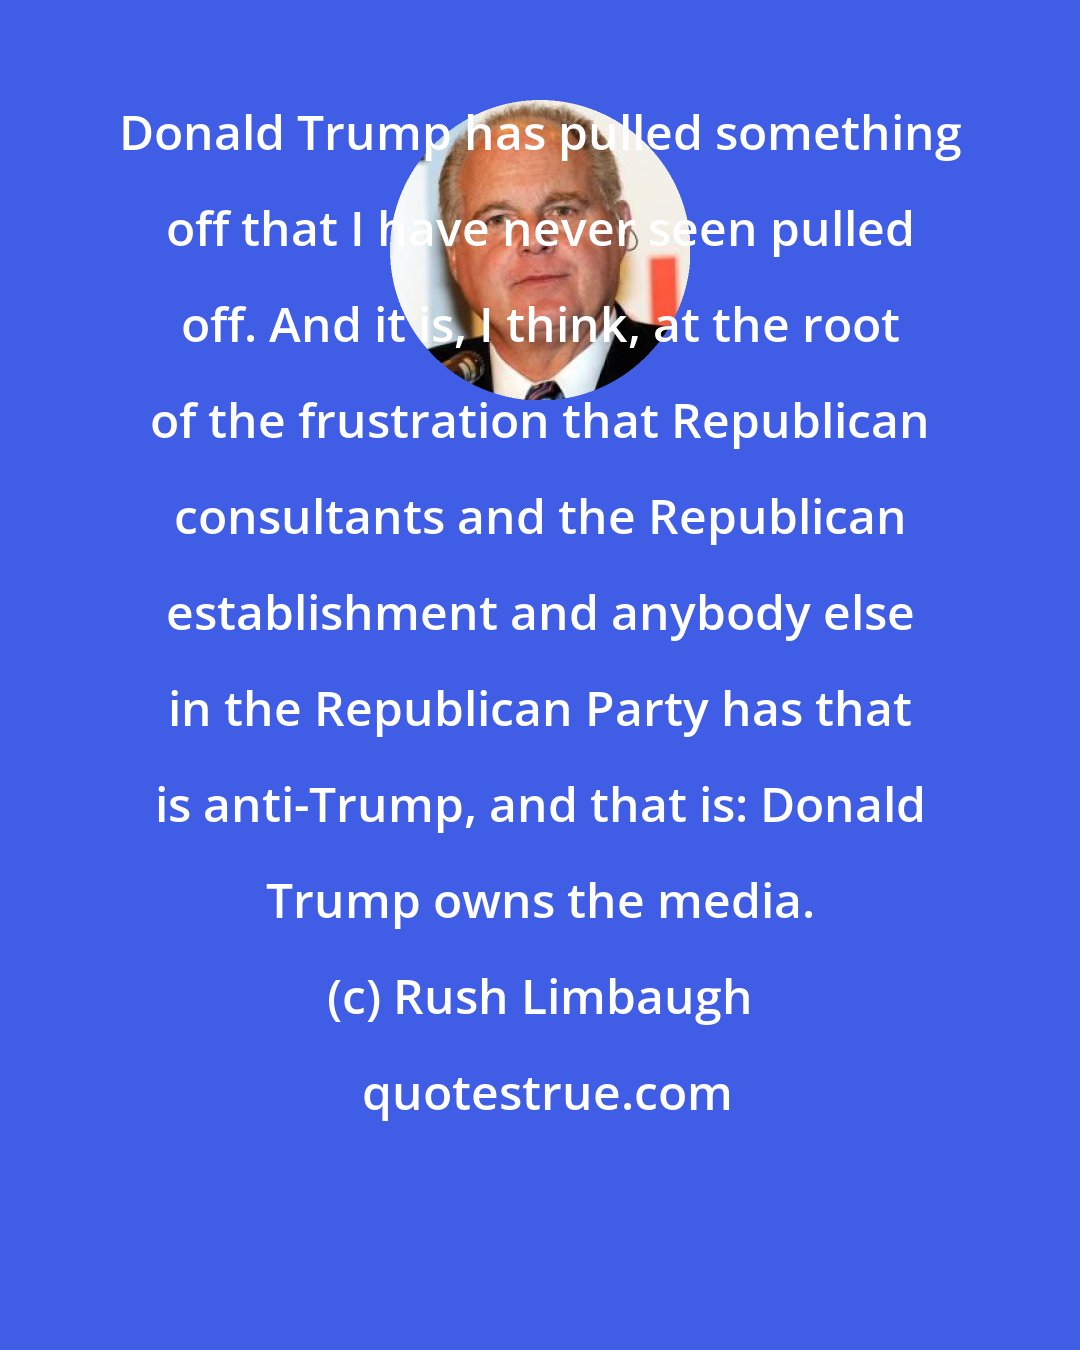 Rush Limbaugh: Donald Trump has pulled something off that I have never seen pulled off. And it is, I think, at the root of the frustration that Republican consultants and the Republican establishment and anybody else in the Republican Party has that is anti-Trump, and that is: Donald Trump owns the media.